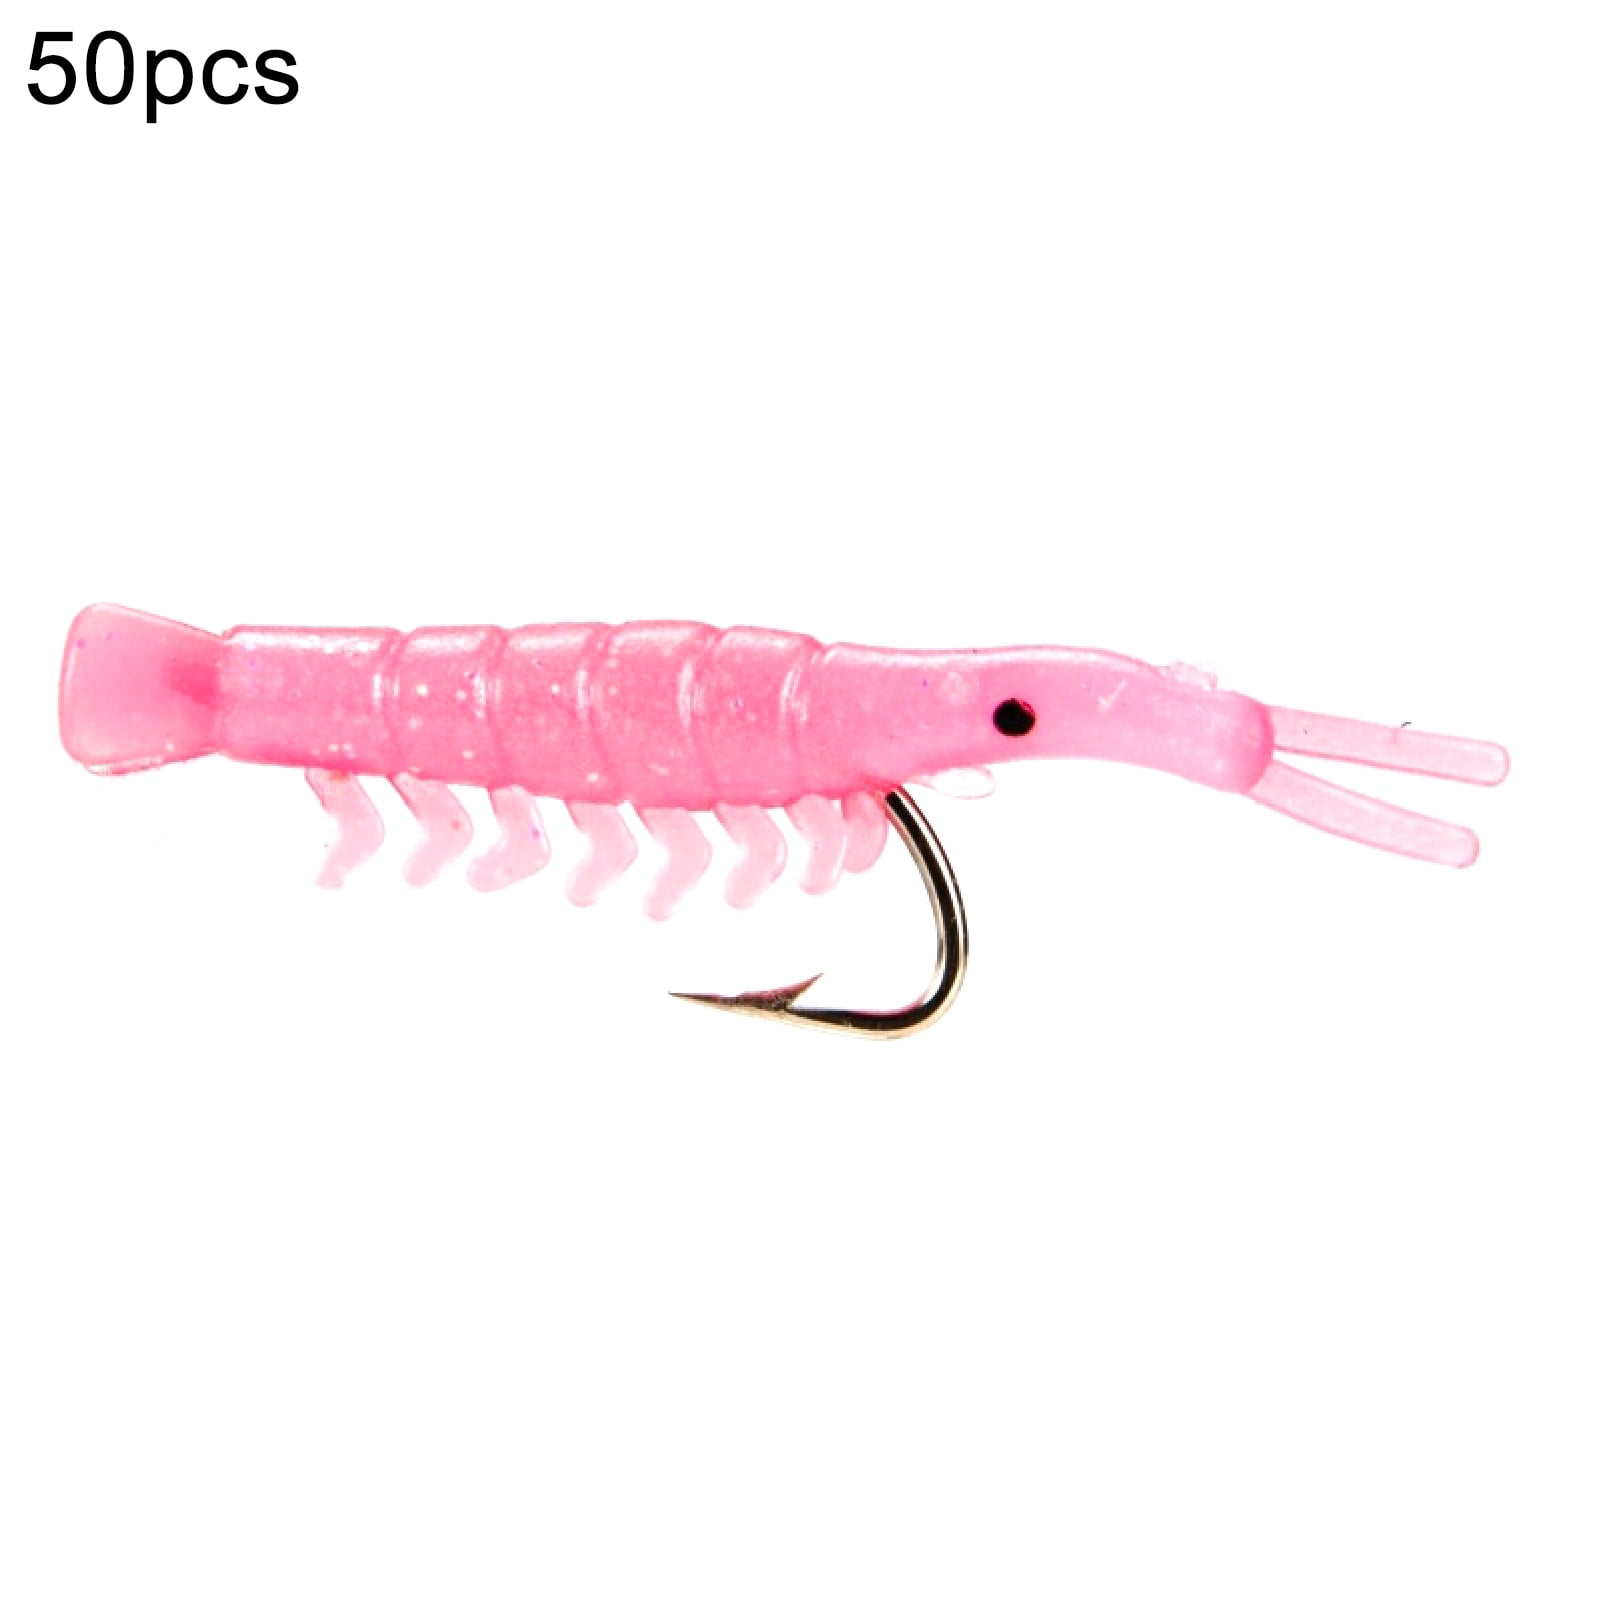 vintage Lupo Lures PINK SHRIMP scent tail action Tackle Fishing Lure .5oz